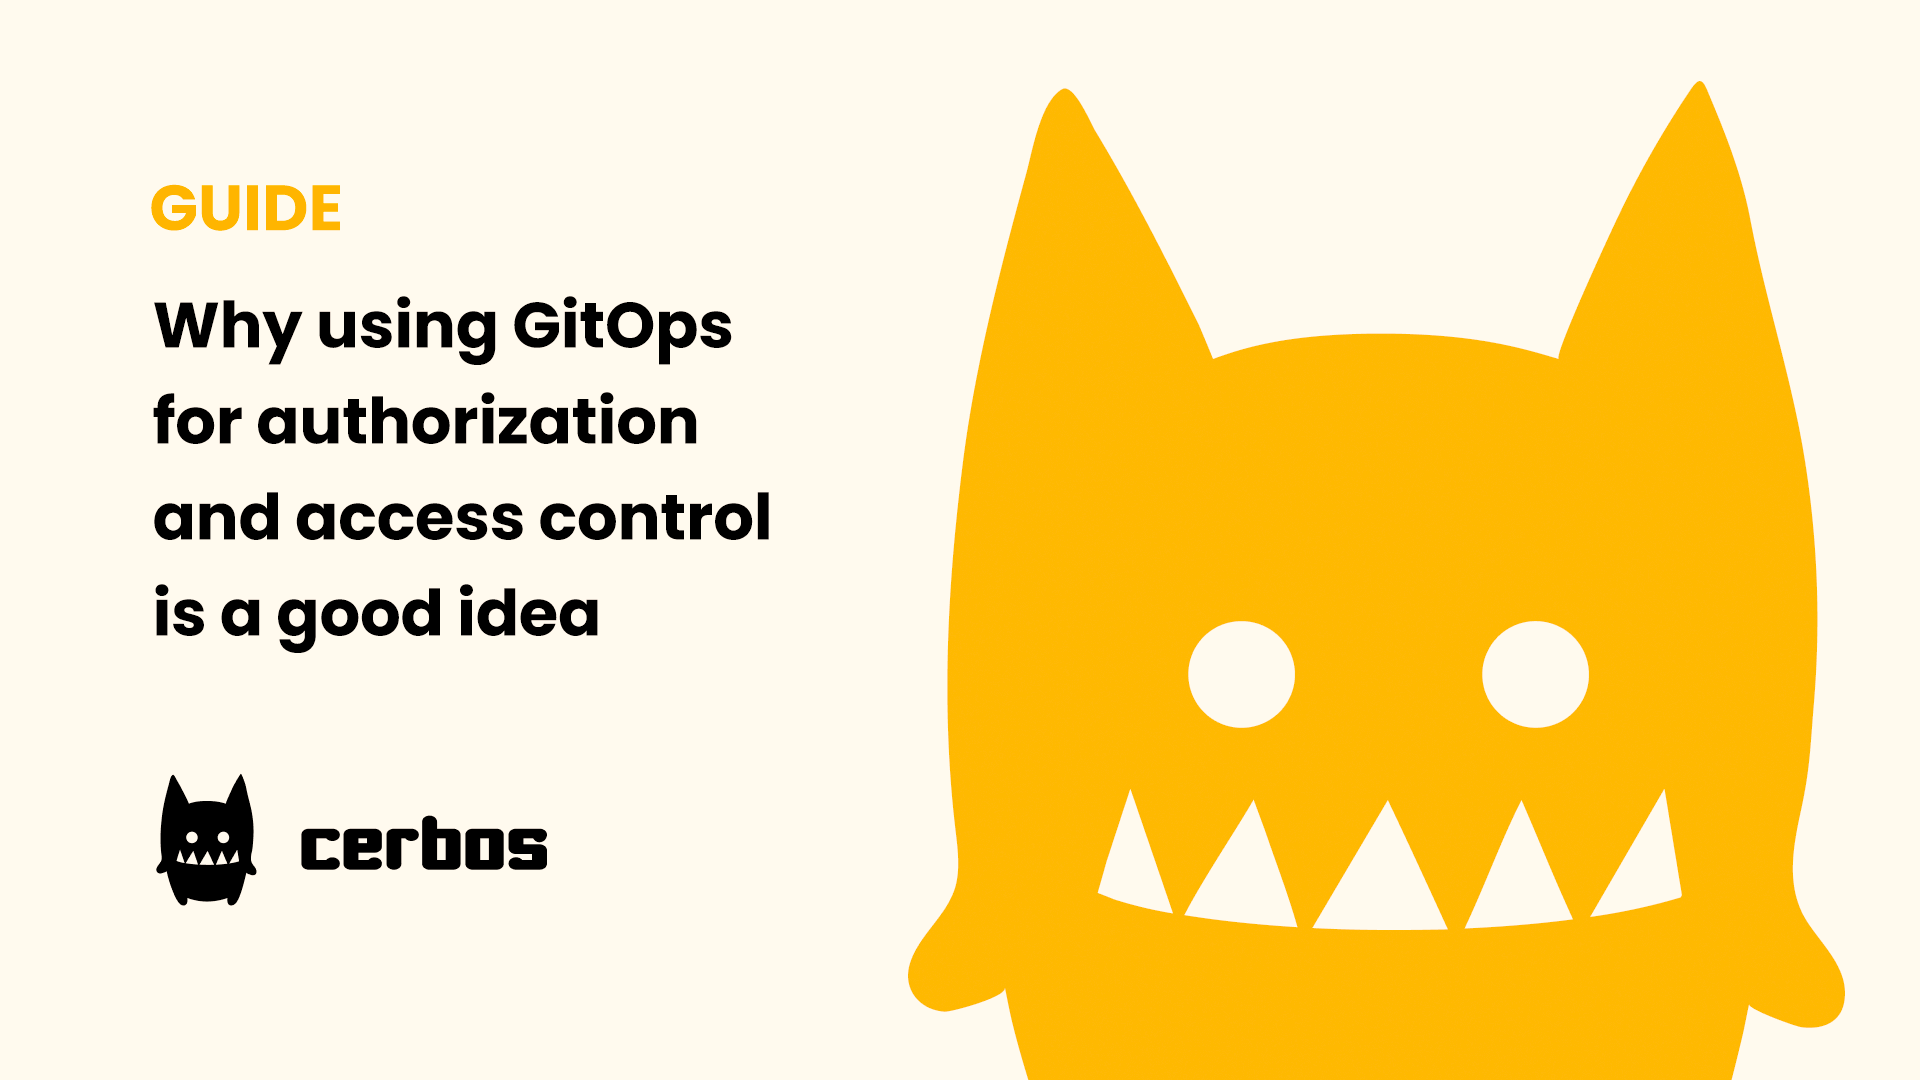 Why using GitOps for authorization and access control is a good idea